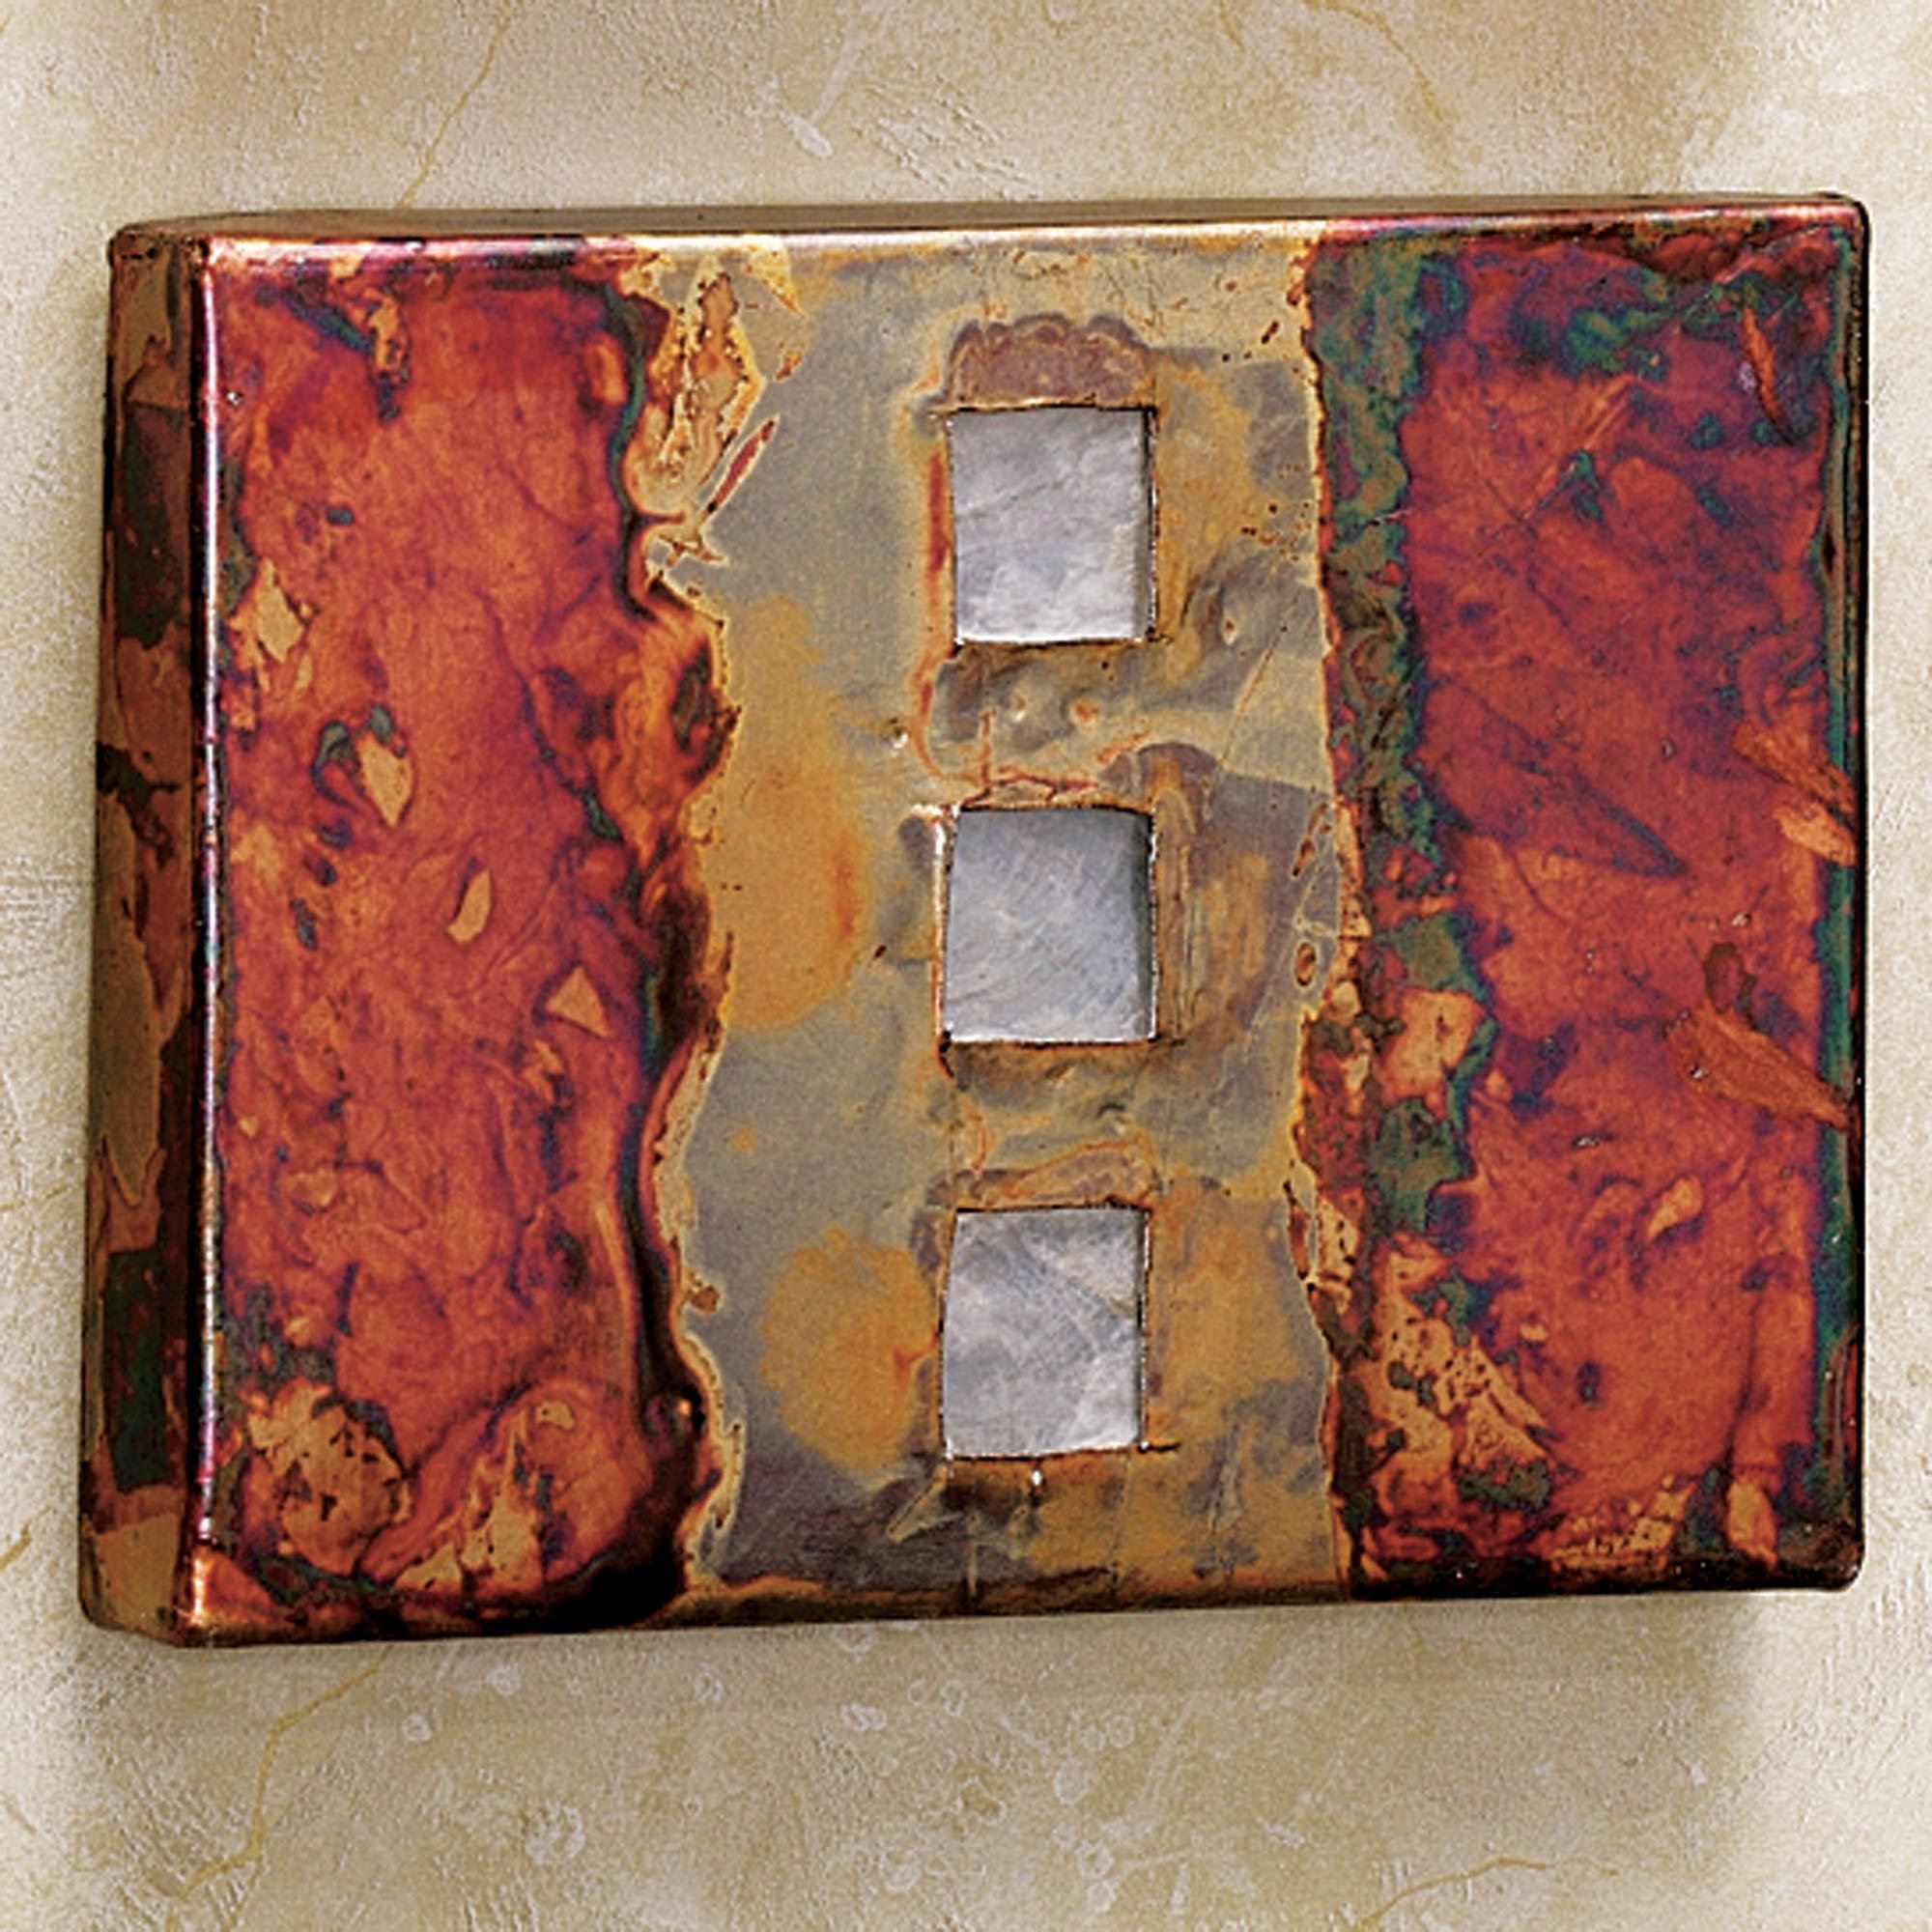 Copper Studio Metal Wall Art Plaque Set Pertaining To Copper Metal Wall Art (View 6 of 15)